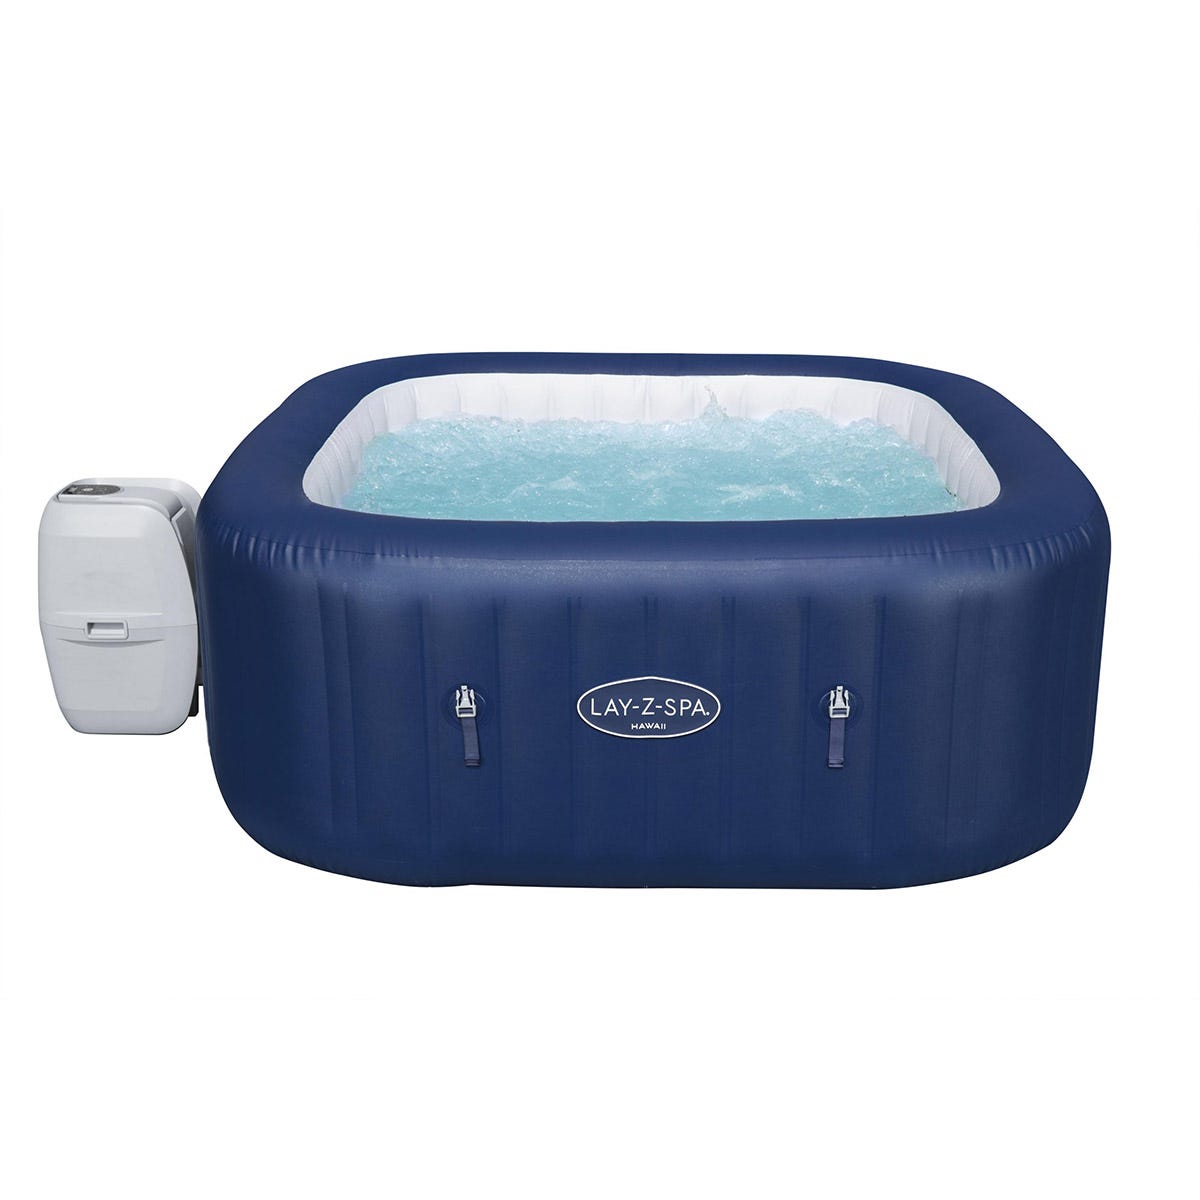 Lay-Z-Spa Hawaii AirJet Hot Tub Inflatable Spa, 4-6 Persons